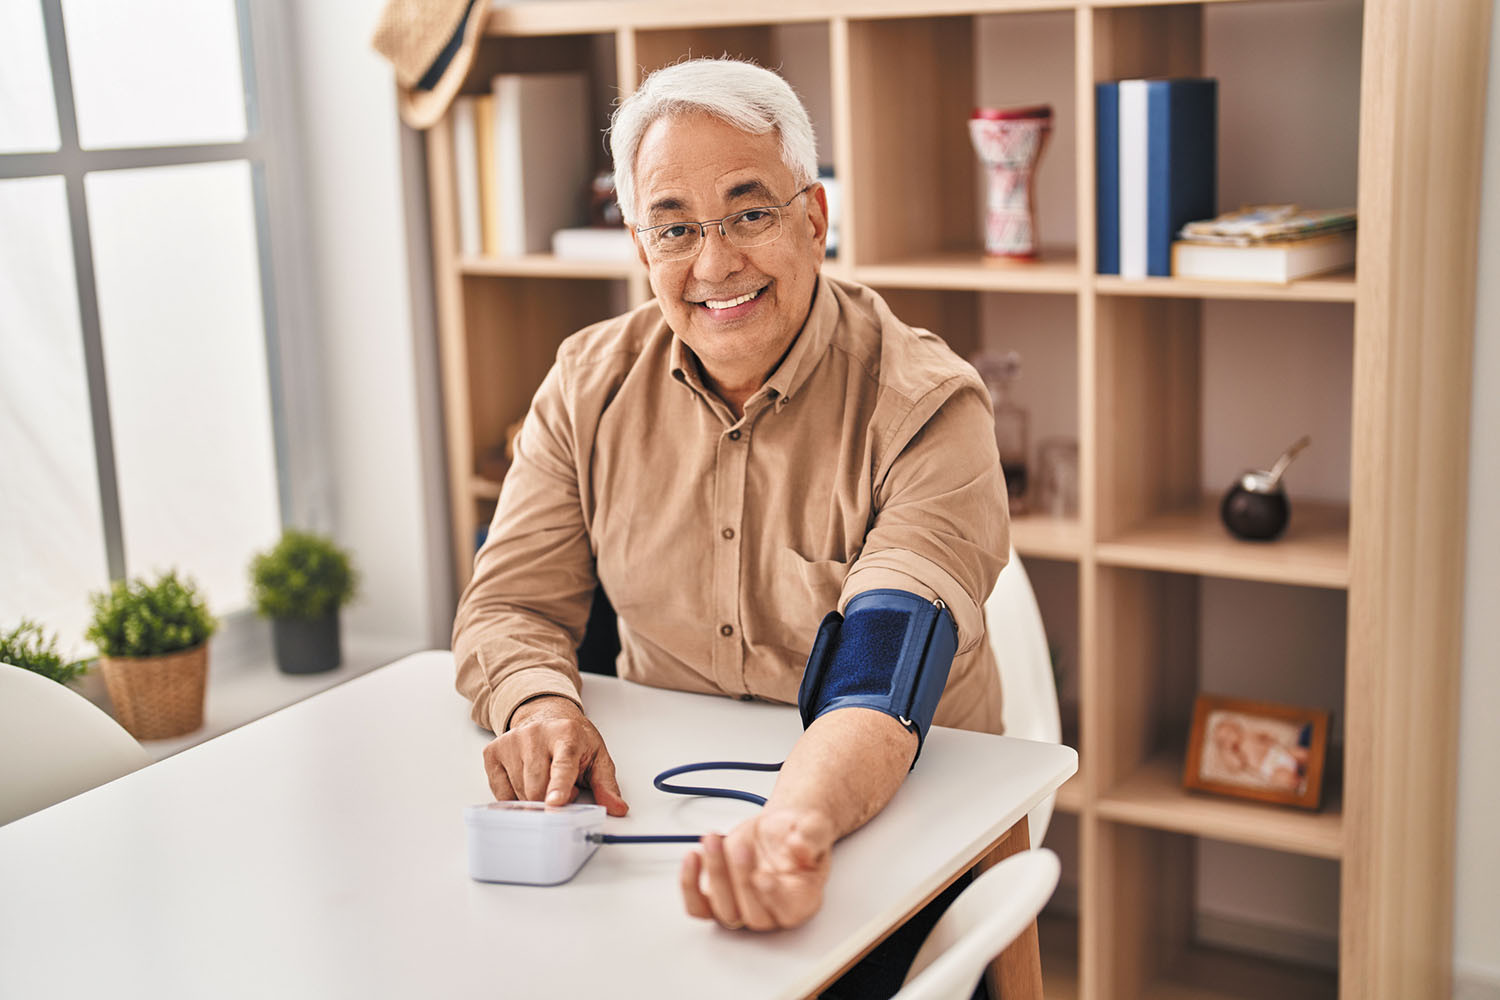 photo of a senior man seated at a table and smiling as he takes his blood pressure using a home monitor